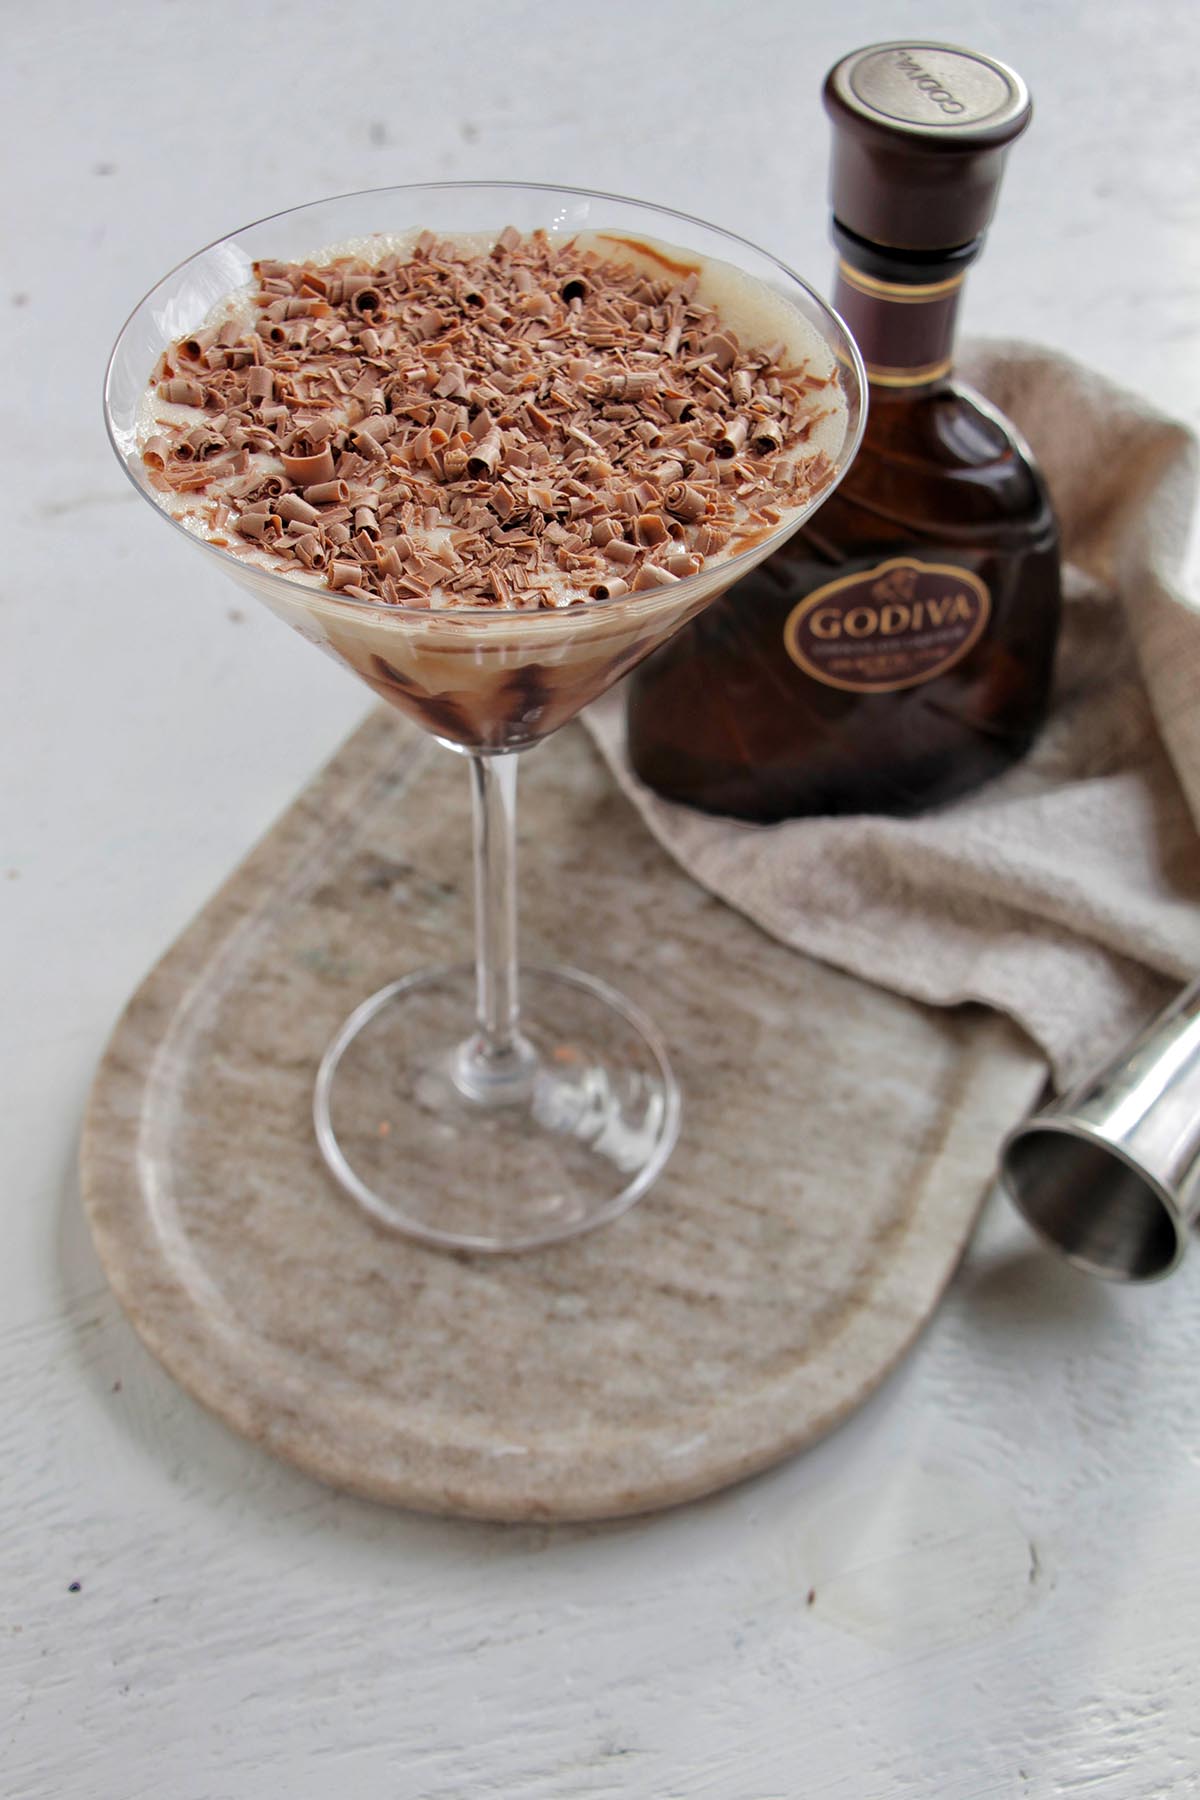 chocolate martini on a serving tray next to Godiva chocolate liqueur bottle.